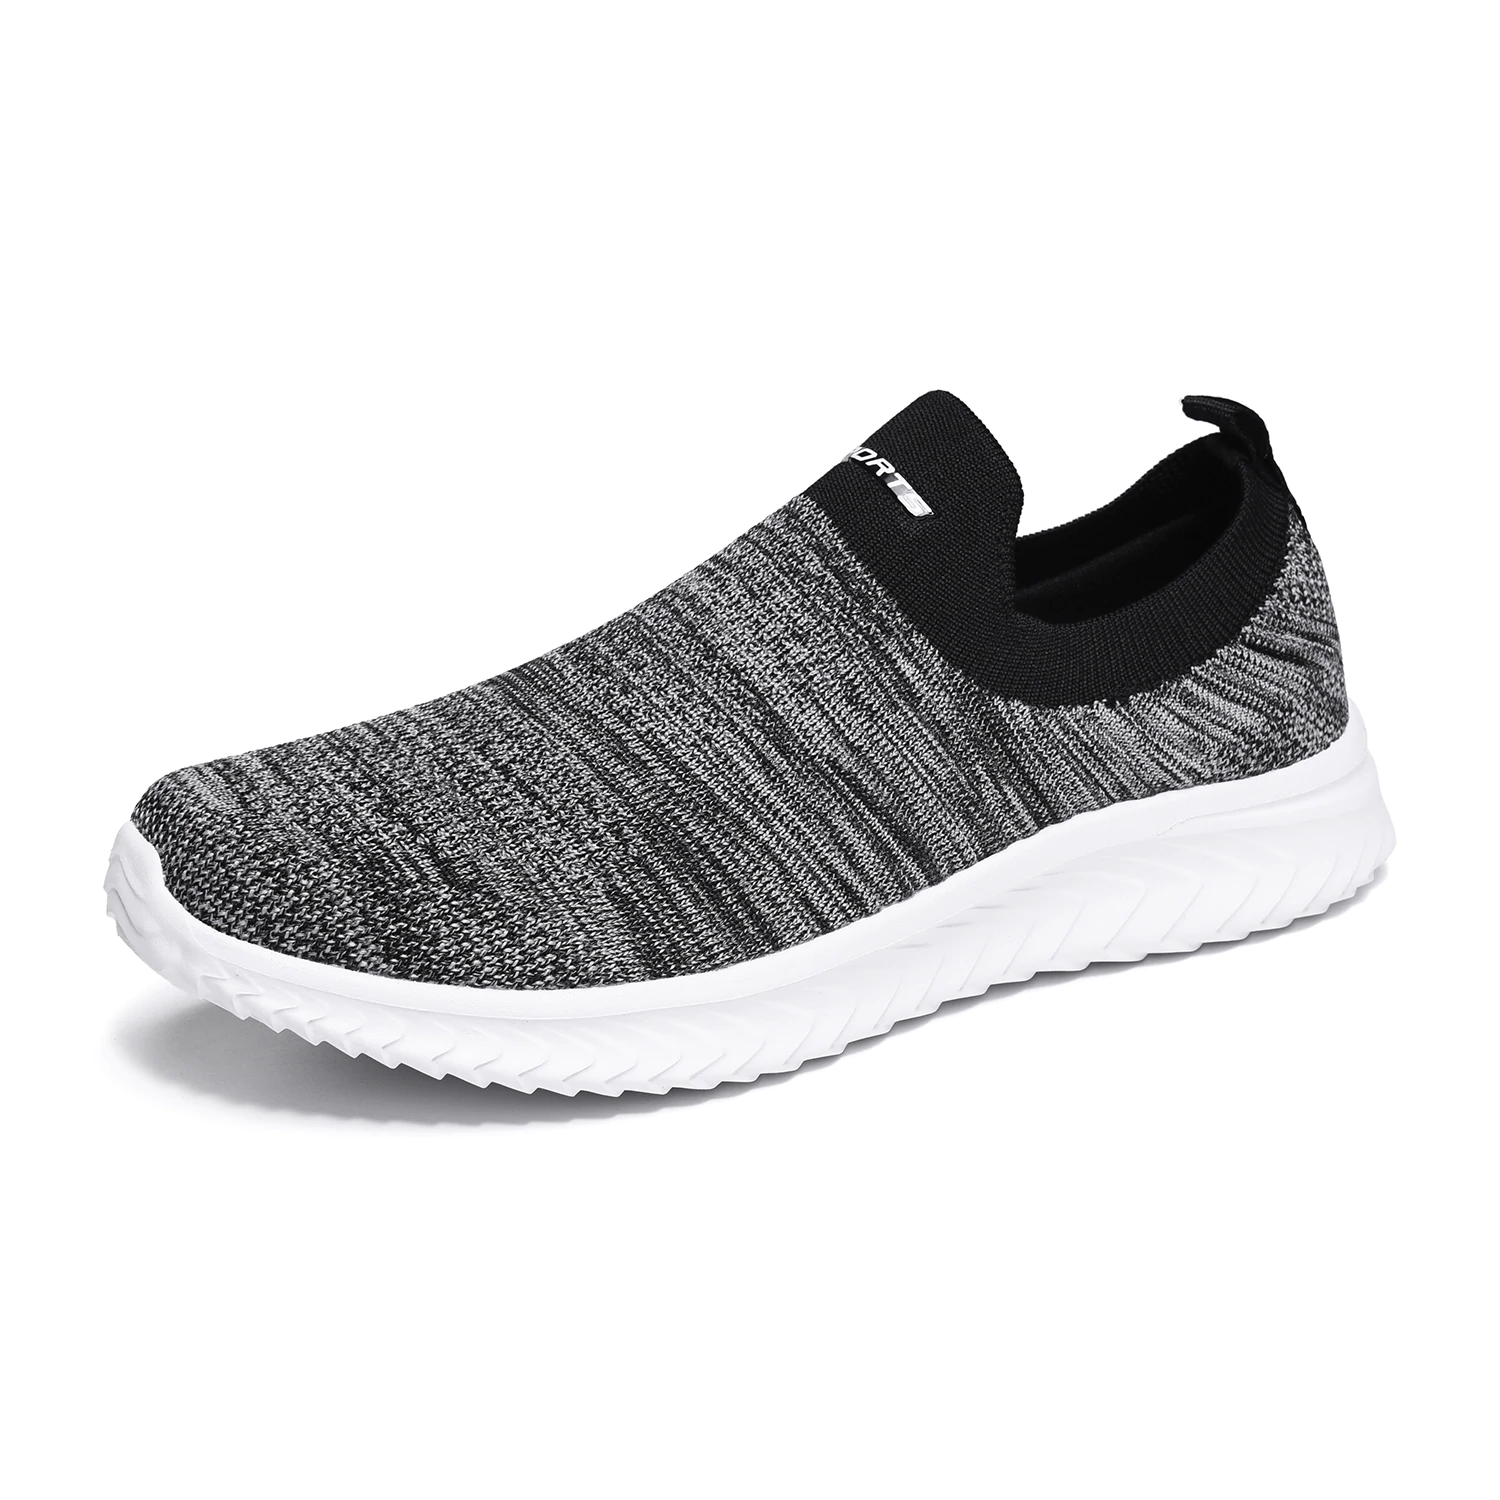 Shoes Men Sneakers Men Comfortable Slip On Trainer casual Lazy Shoes Lightweight Couple Sock Sneakers Hombre Footwear